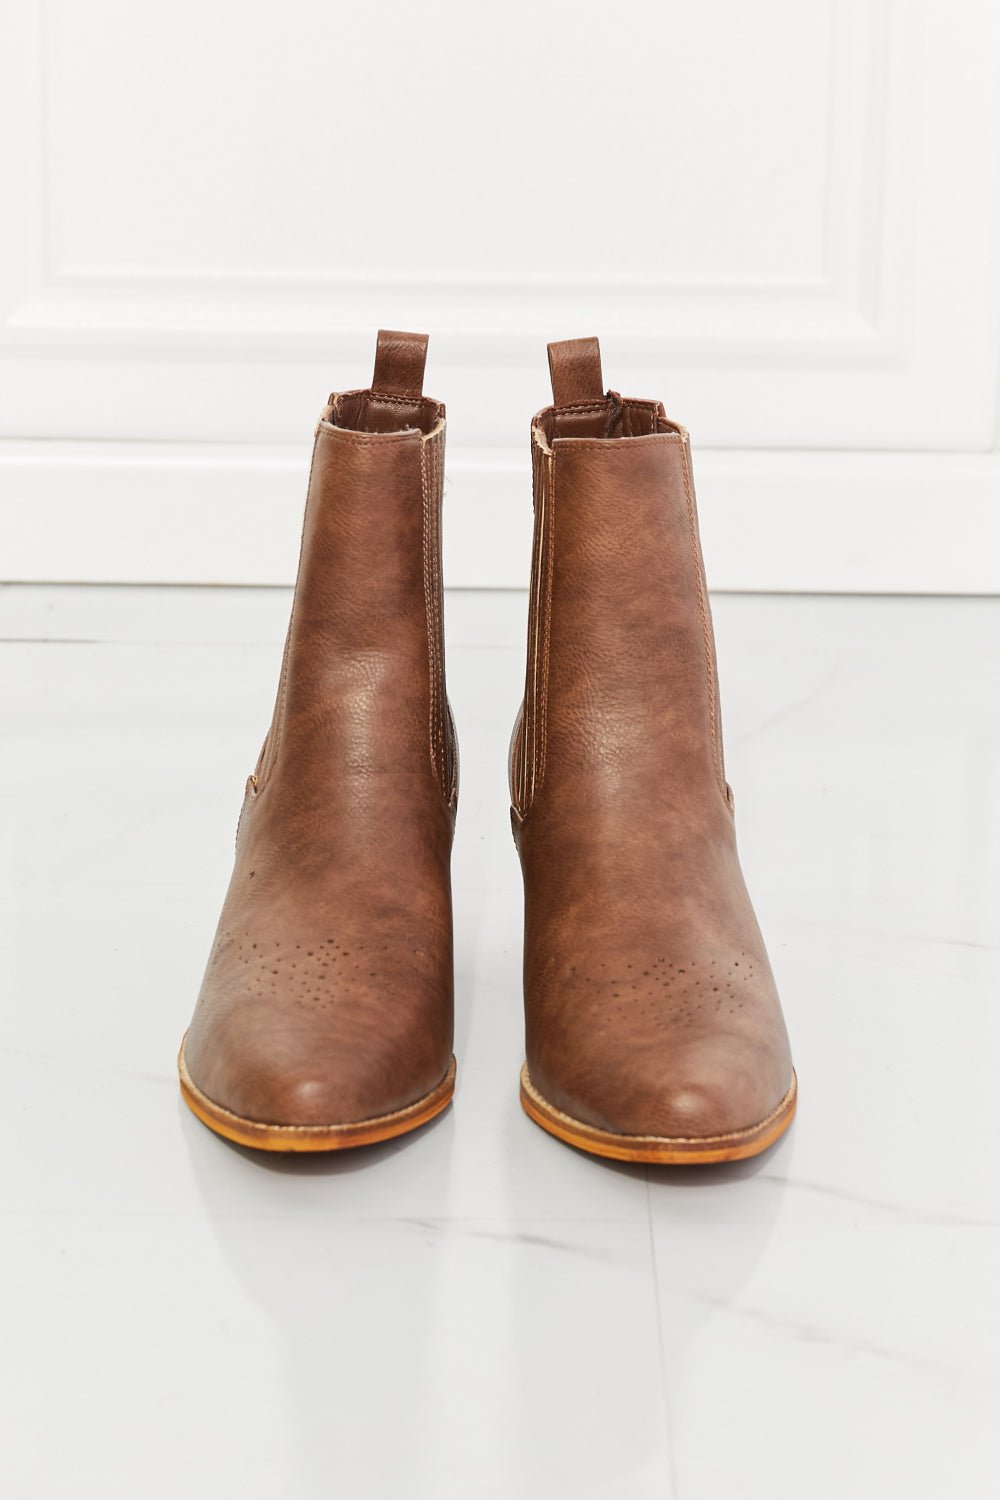 Vegan Leather Stacked Heel Chelsea Boot in ChestnutBootiesMelody